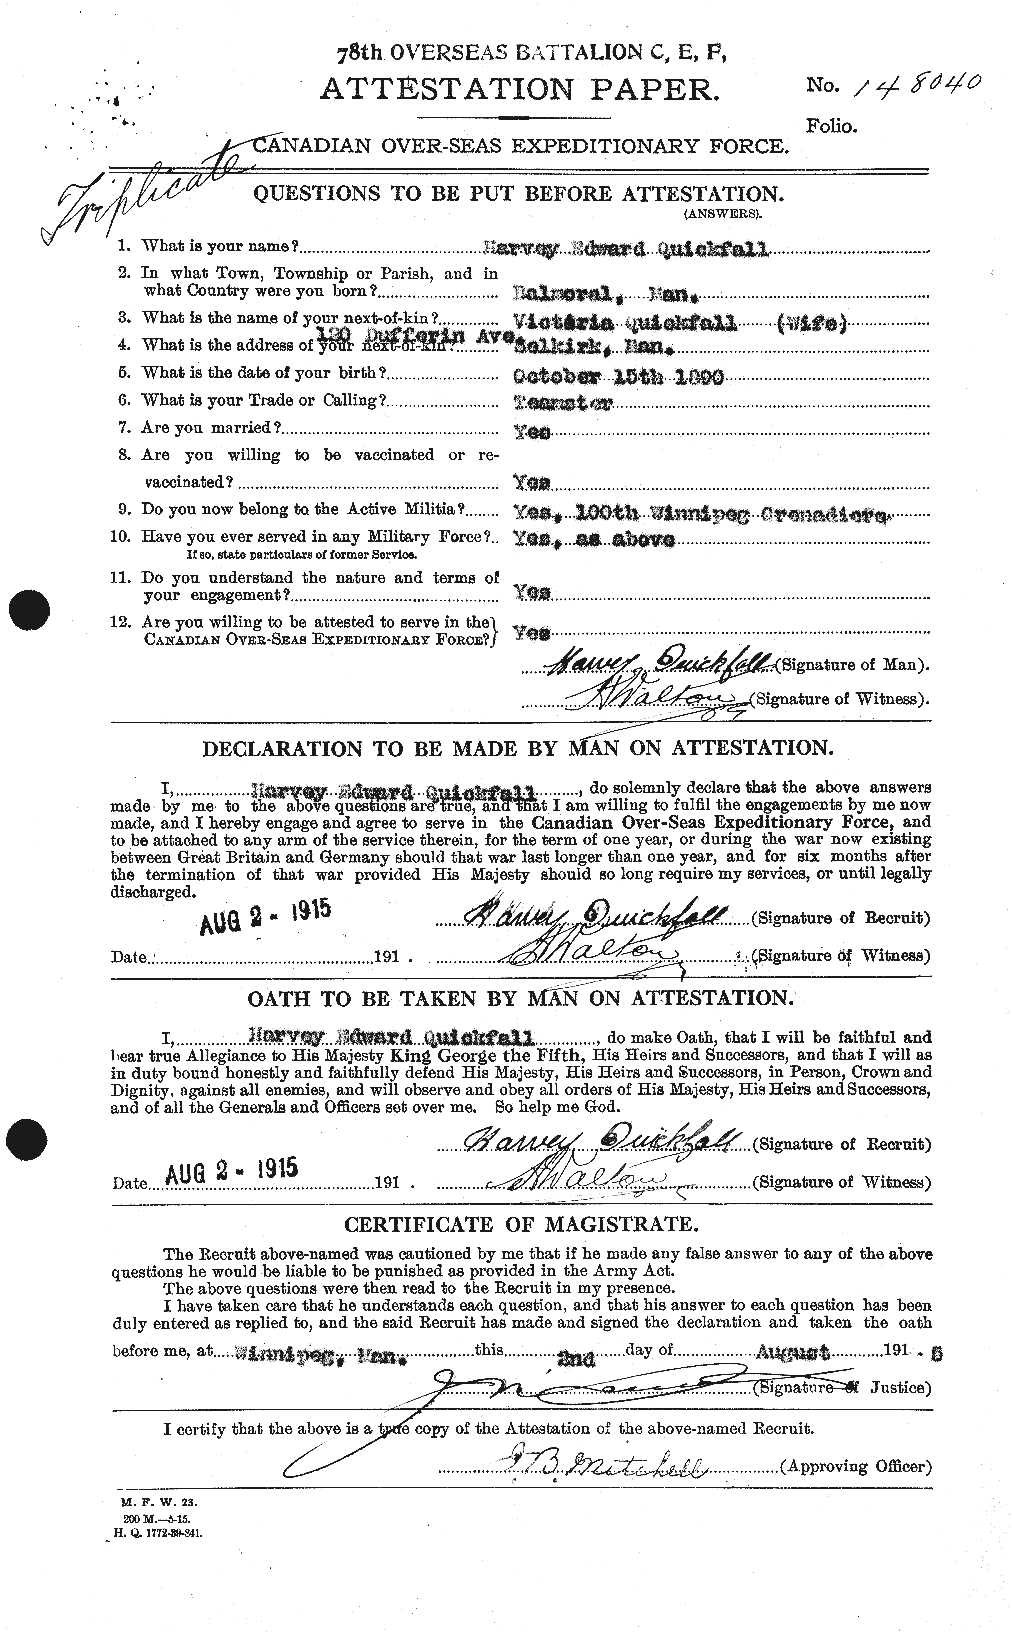 Personnel Records of the First World War - CEF 594033a